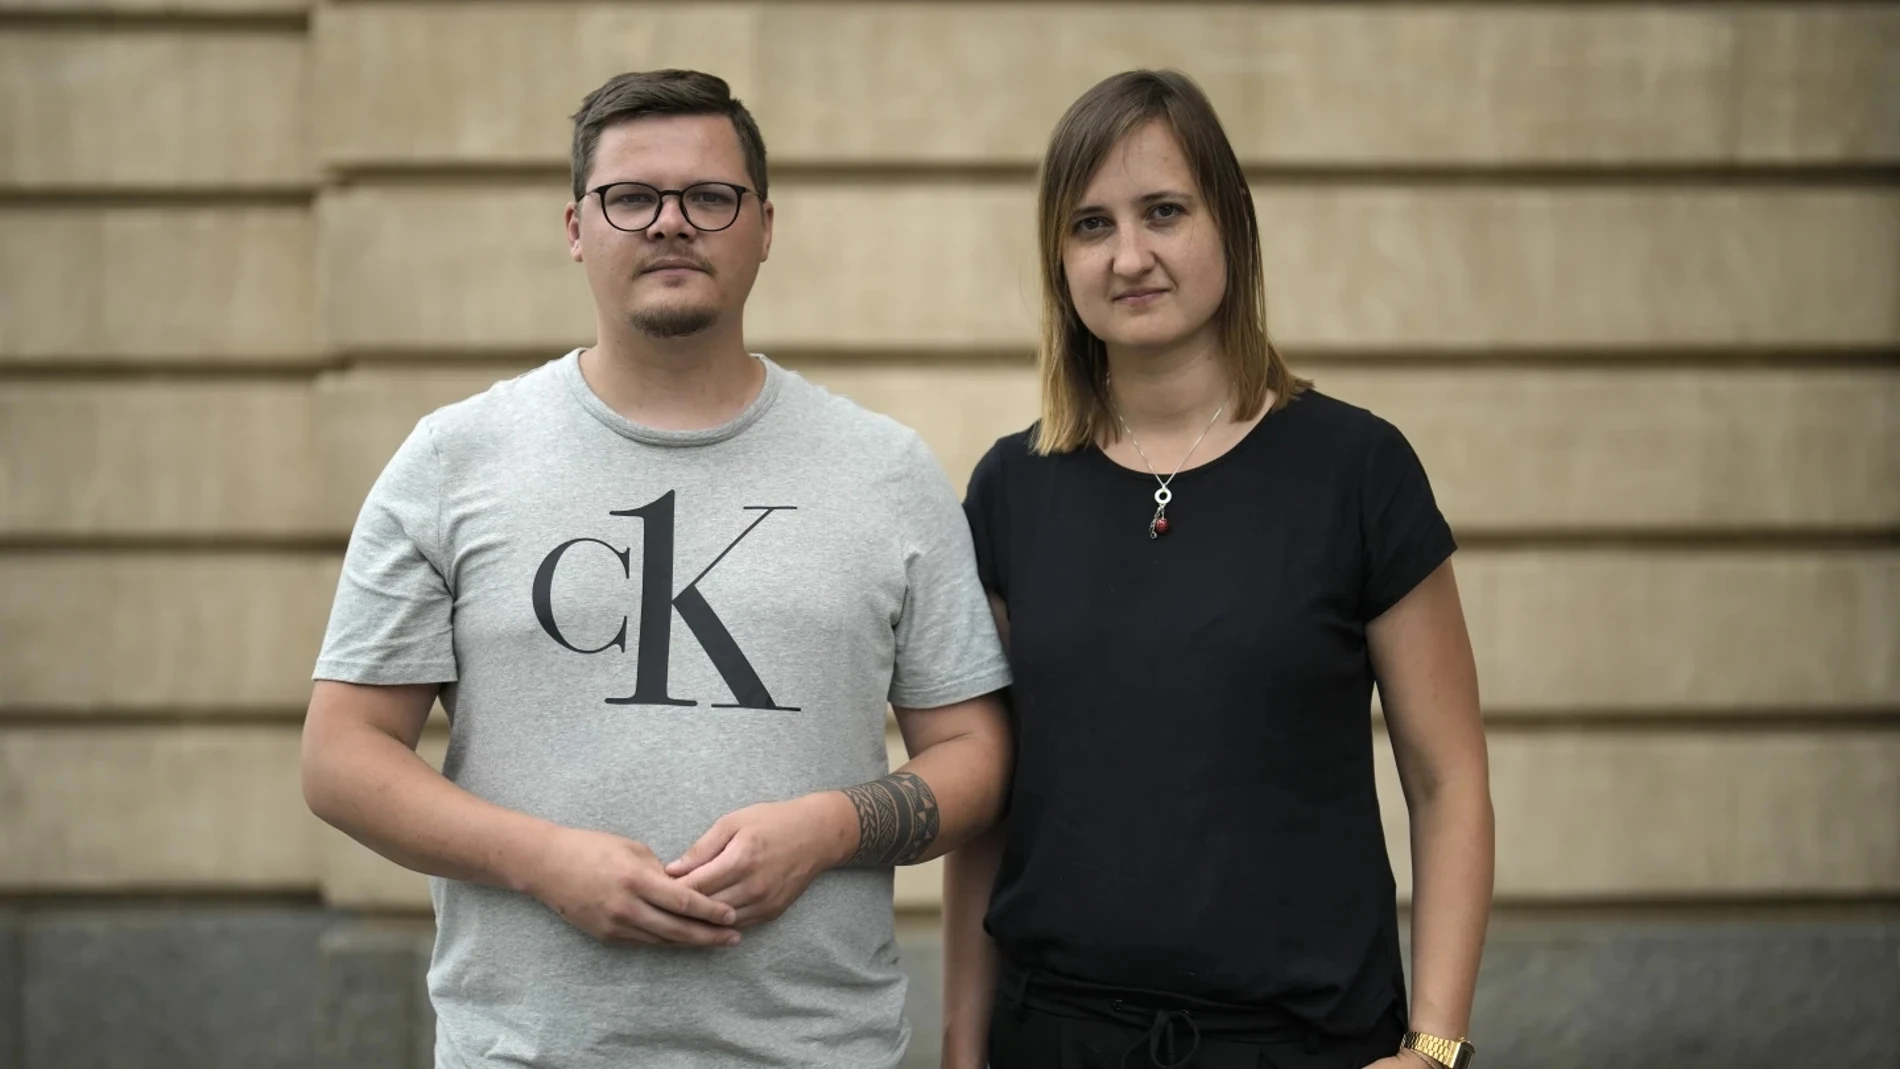 Teachers Laura Nickel and Max Teske called out far-right activities at their German school. Then they had to leave Mina Witkojc School, in Burg.